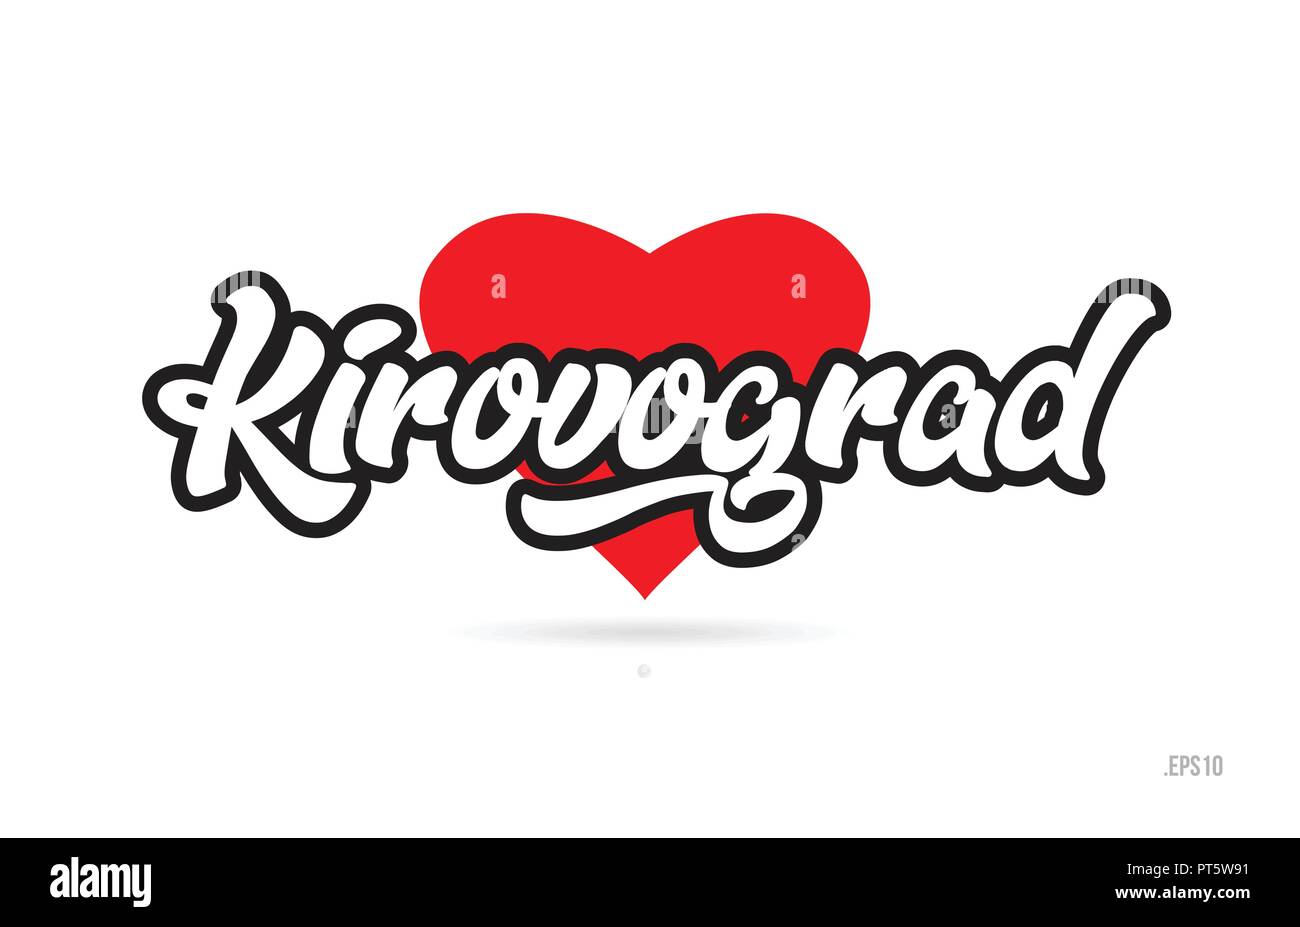 kirovograd city text design with red heart typographic icon design suitable for touristic promotion Stock Vector